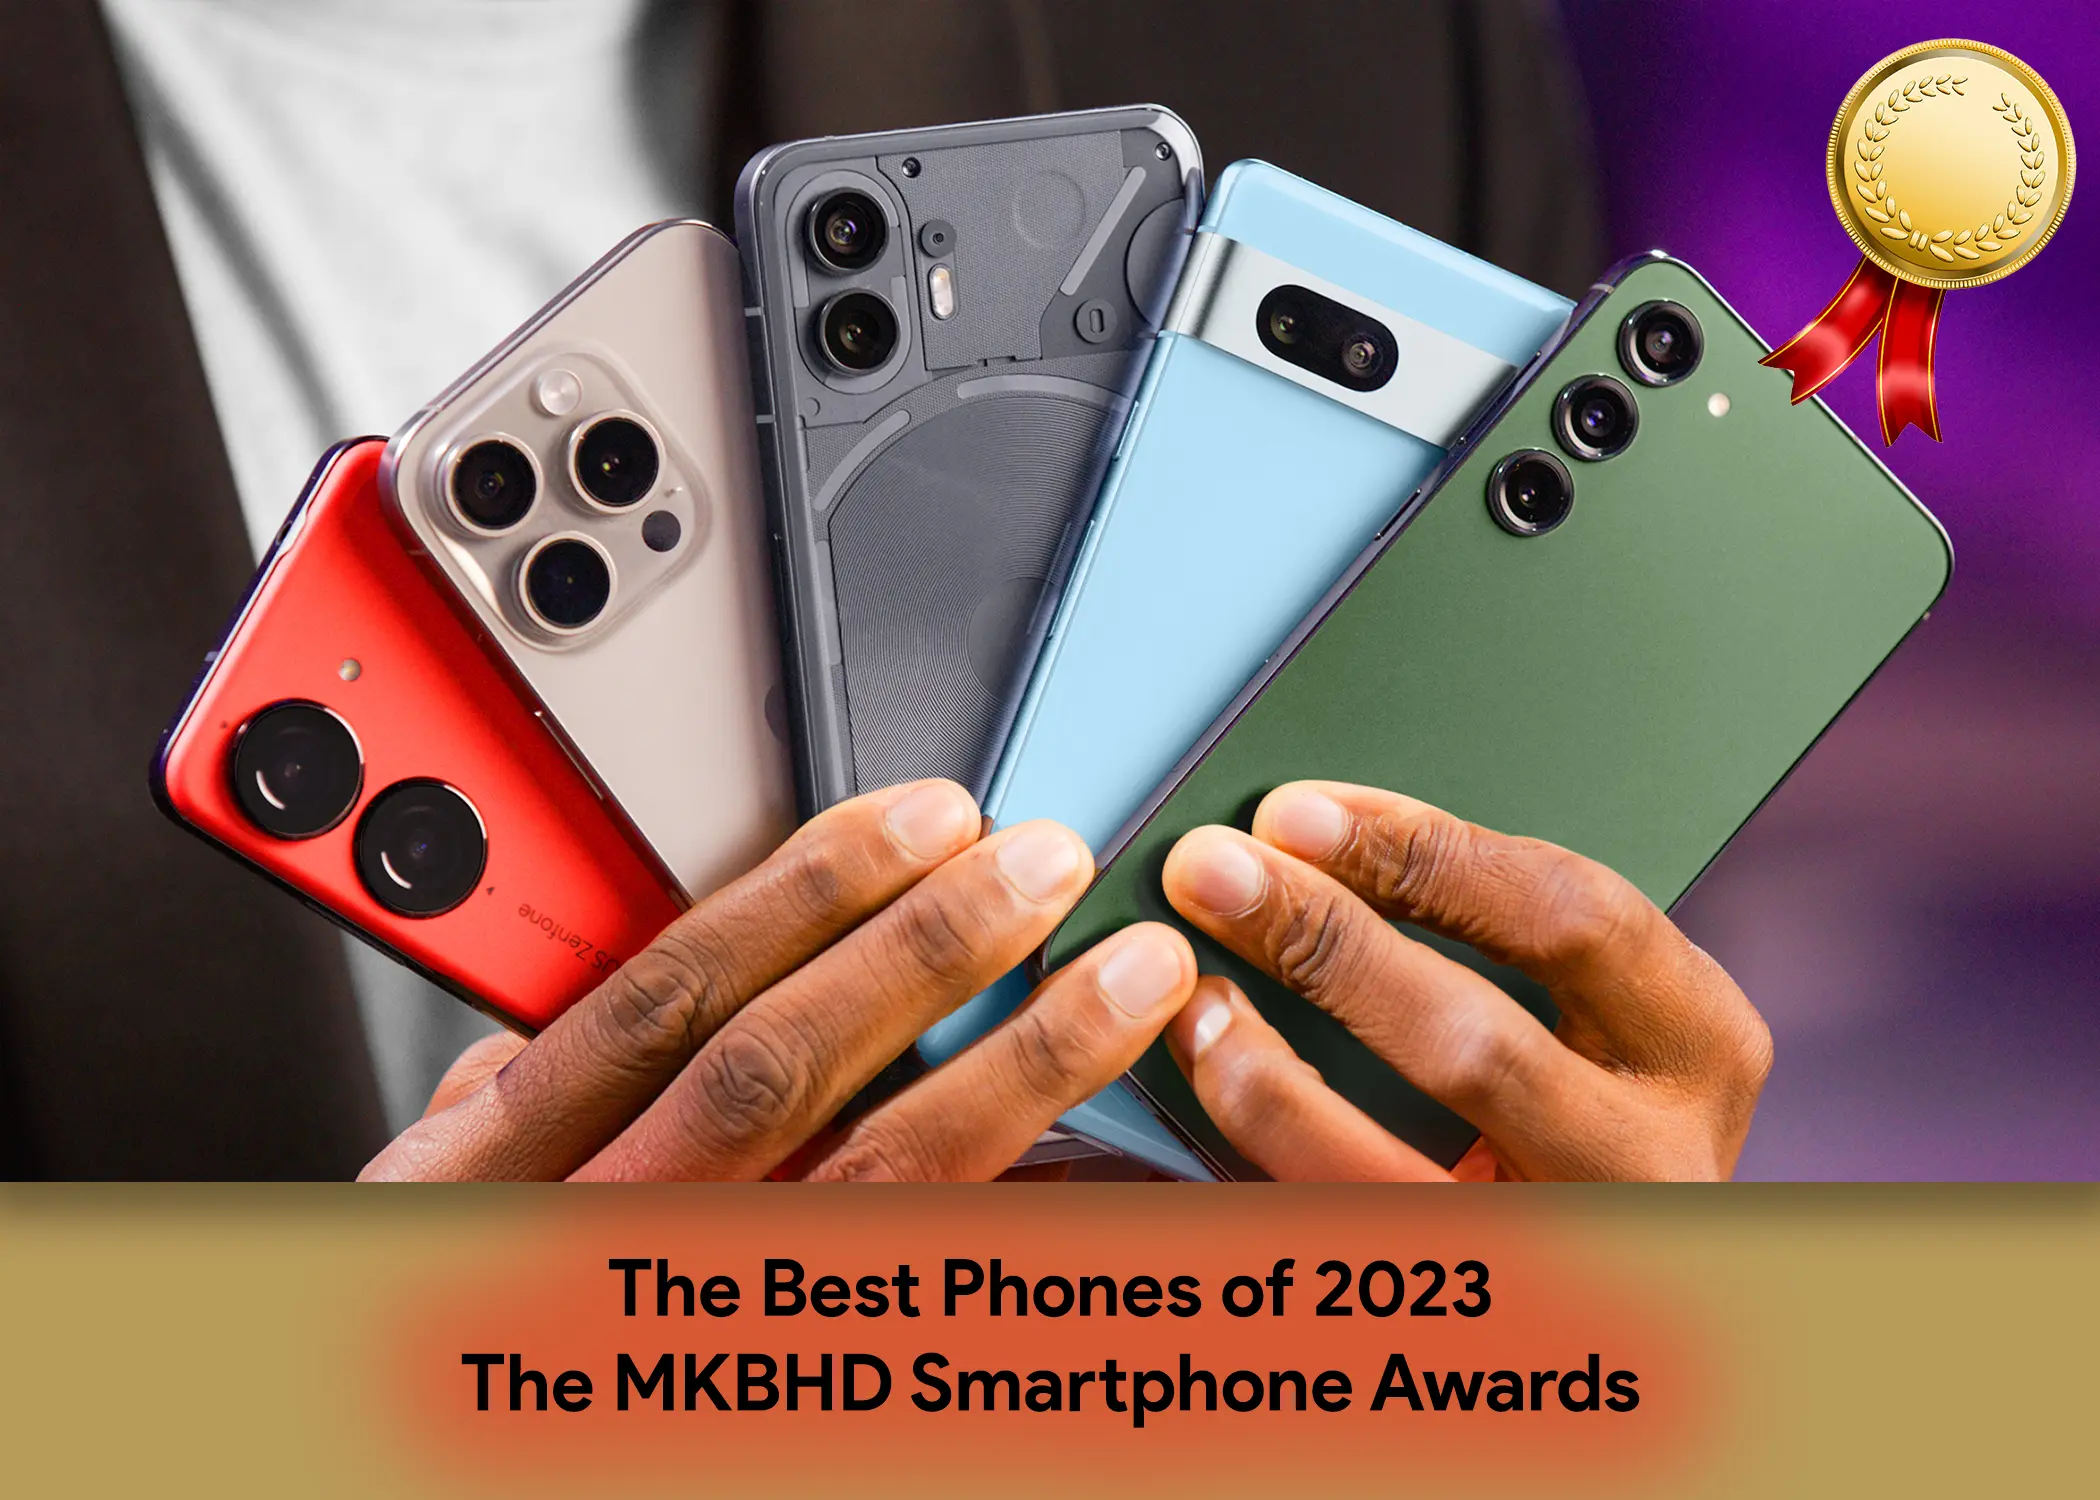 The Best Phones of 2023: The MKBHD Smartphone Awards